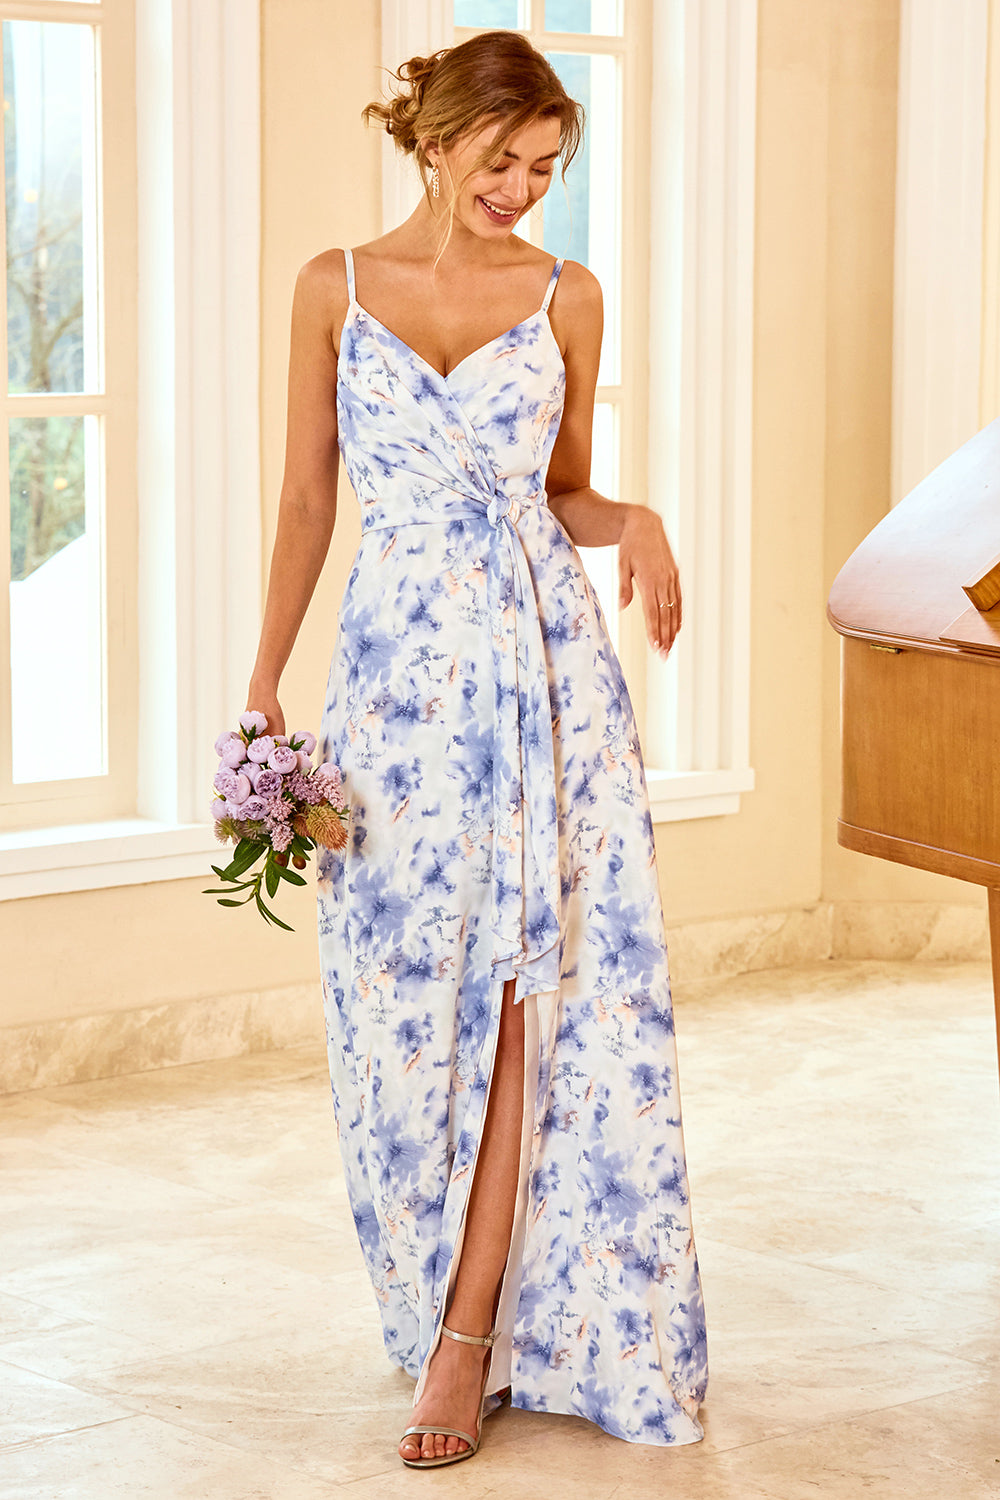 Floral Mother of the Bride Dresses - Dress for the Wedding